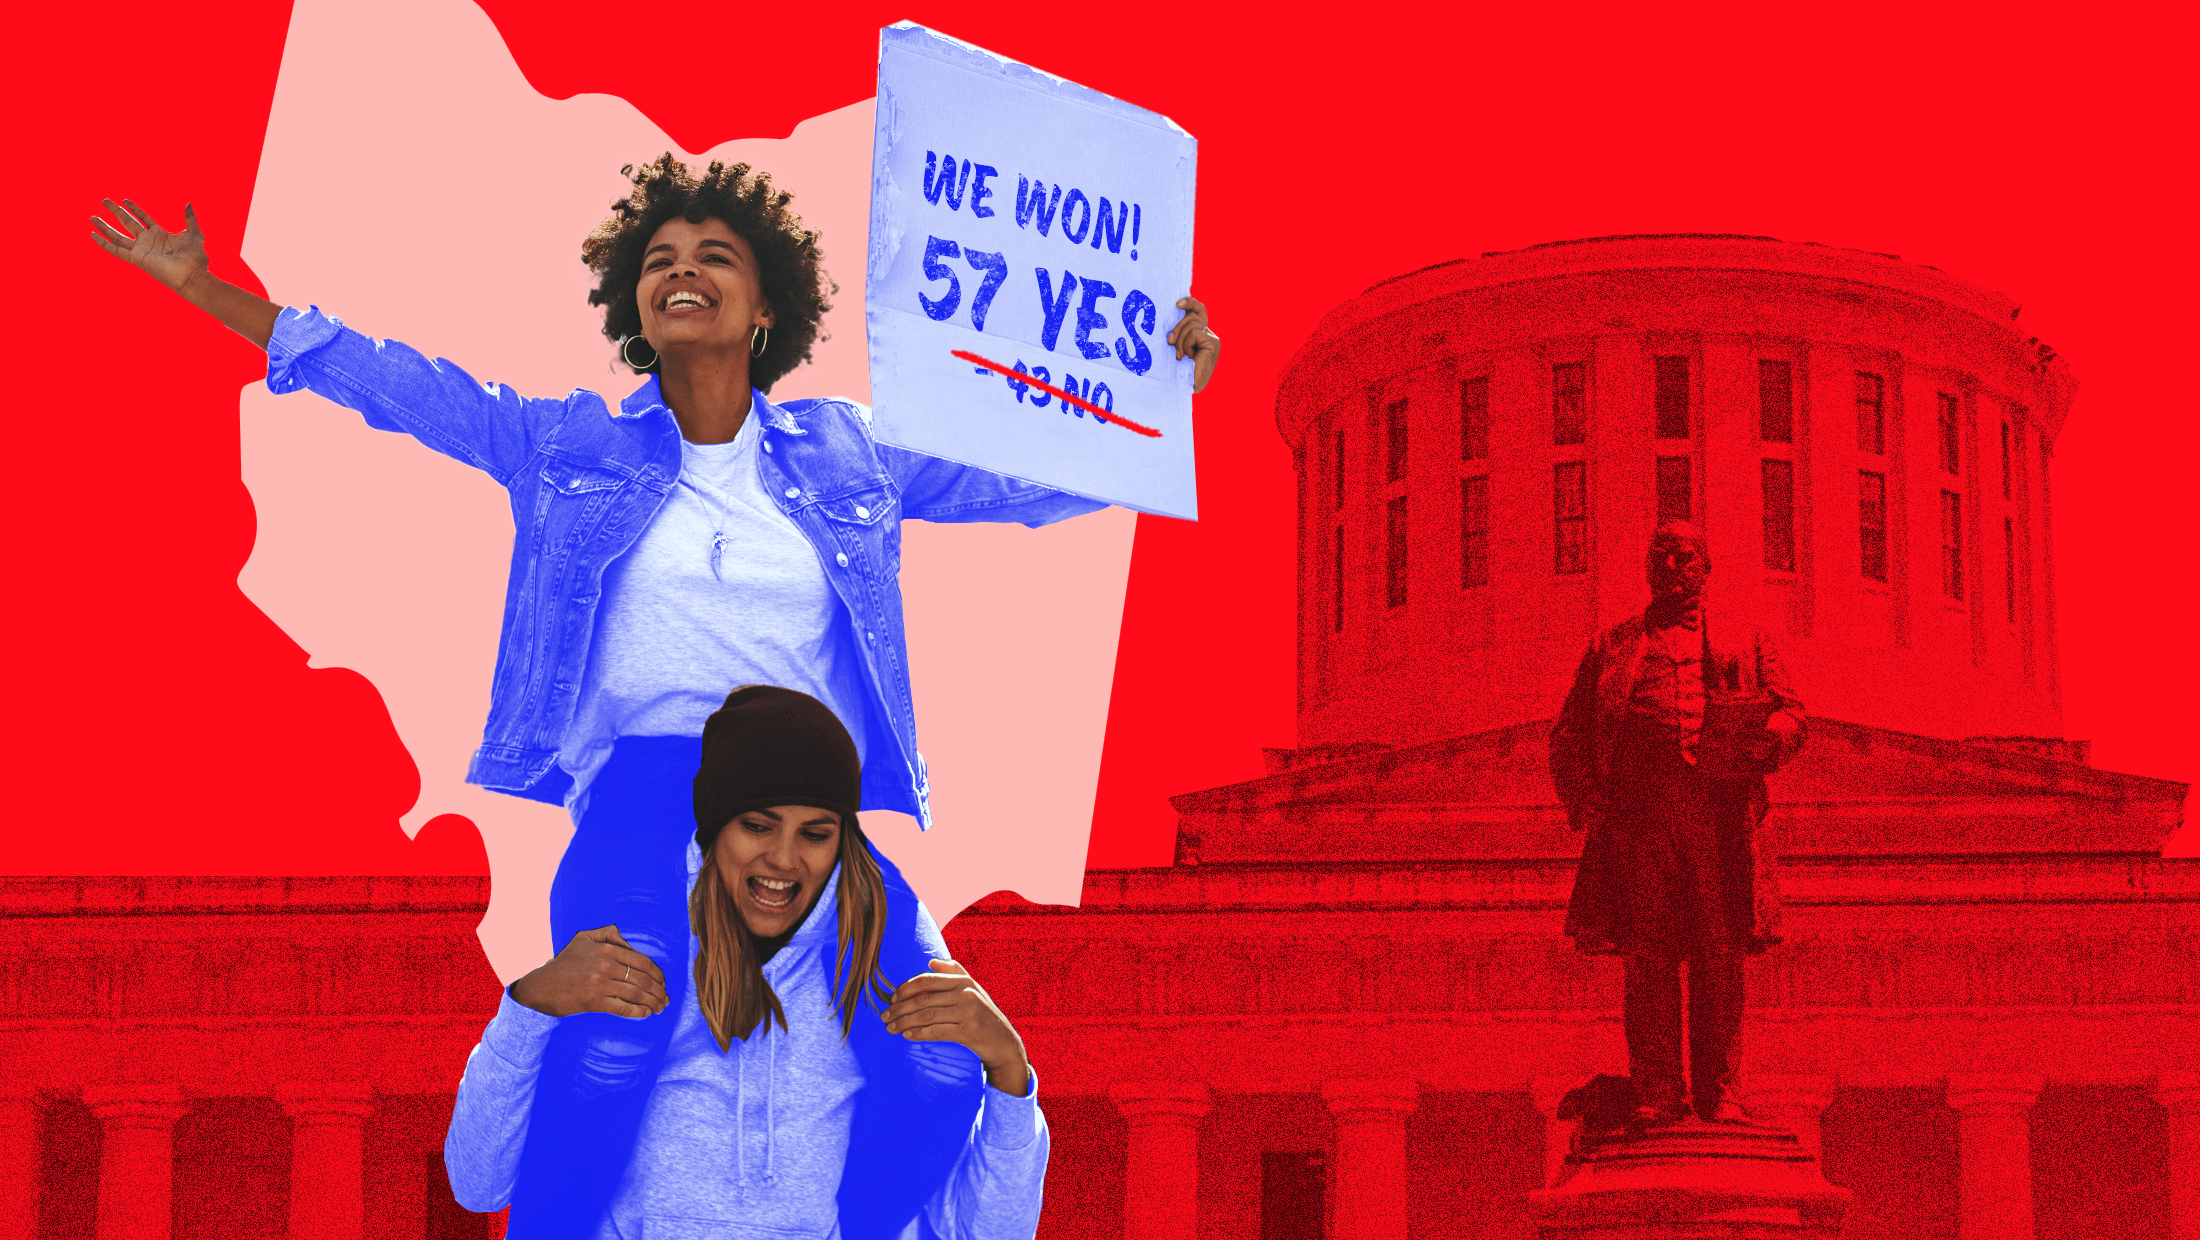 Red background with Ohio Legislature faded into the back and two blue-toned people (one on the other's shoulders) holding a sign that reads "WE WON 57 YES" in front of a pink-toned shape of Ohio.